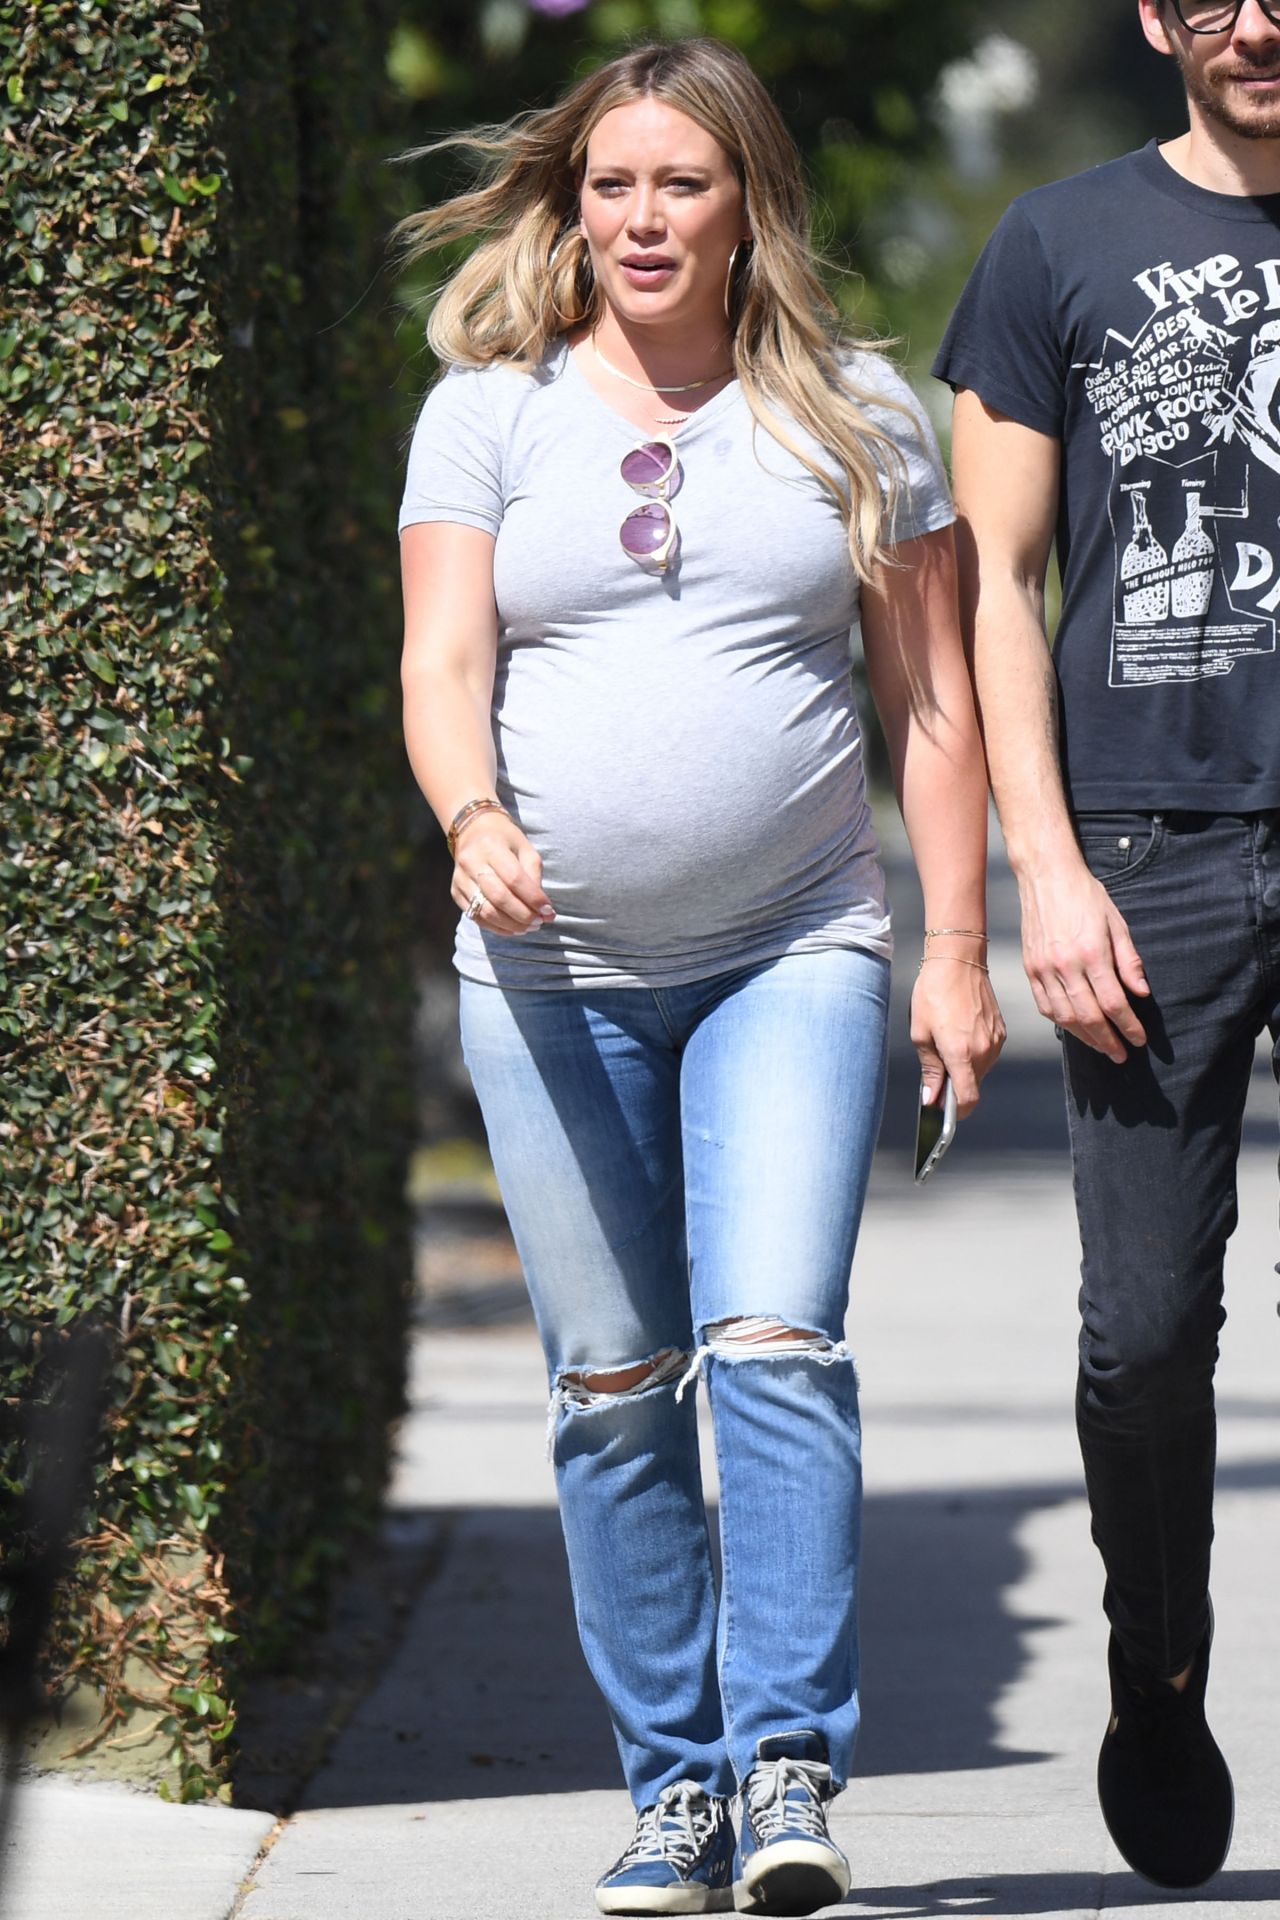 hilary-duff-out-in-los-angeles-09-28-2018-9.jpg